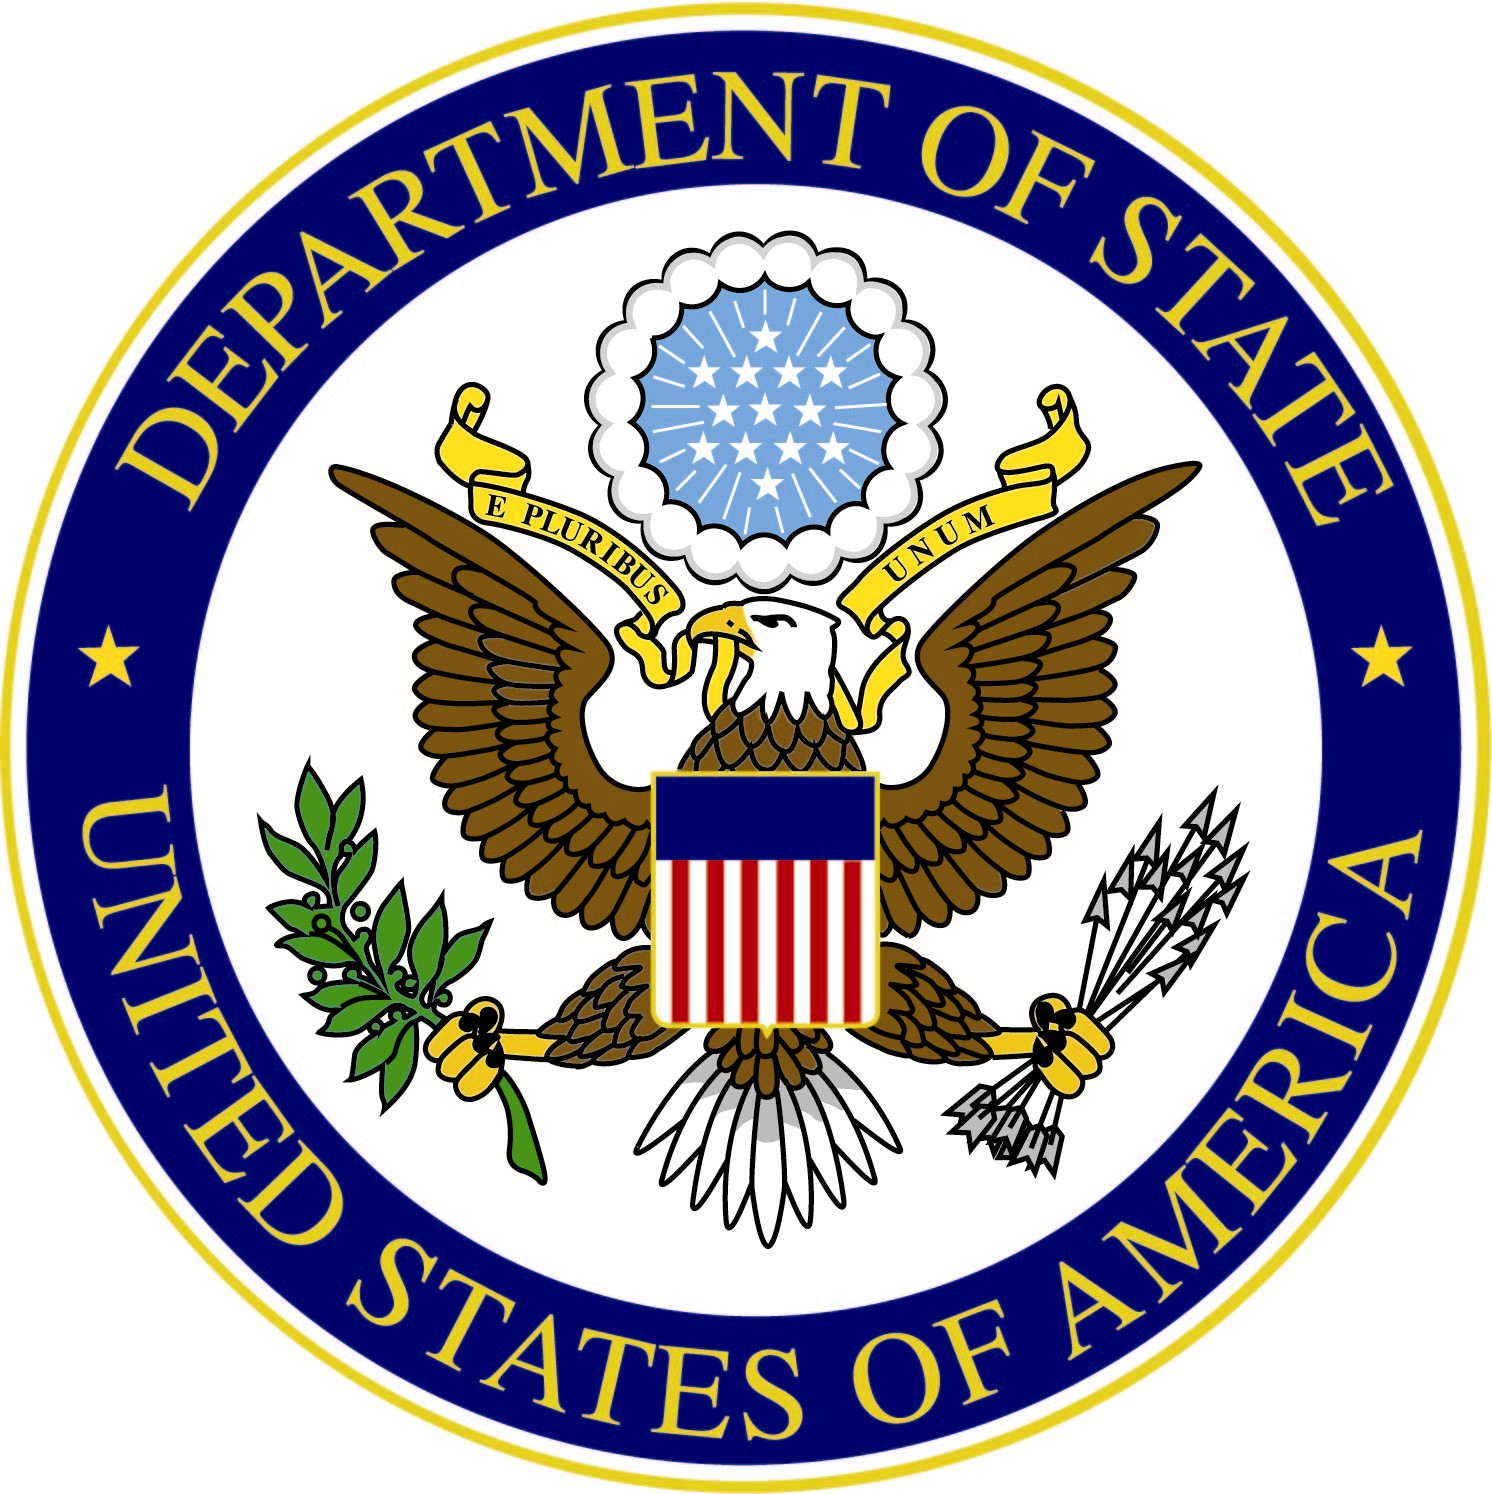 United States Agency for International Development (USAID) Emergency Response to Flooding in the Democratic Republic of the Congo